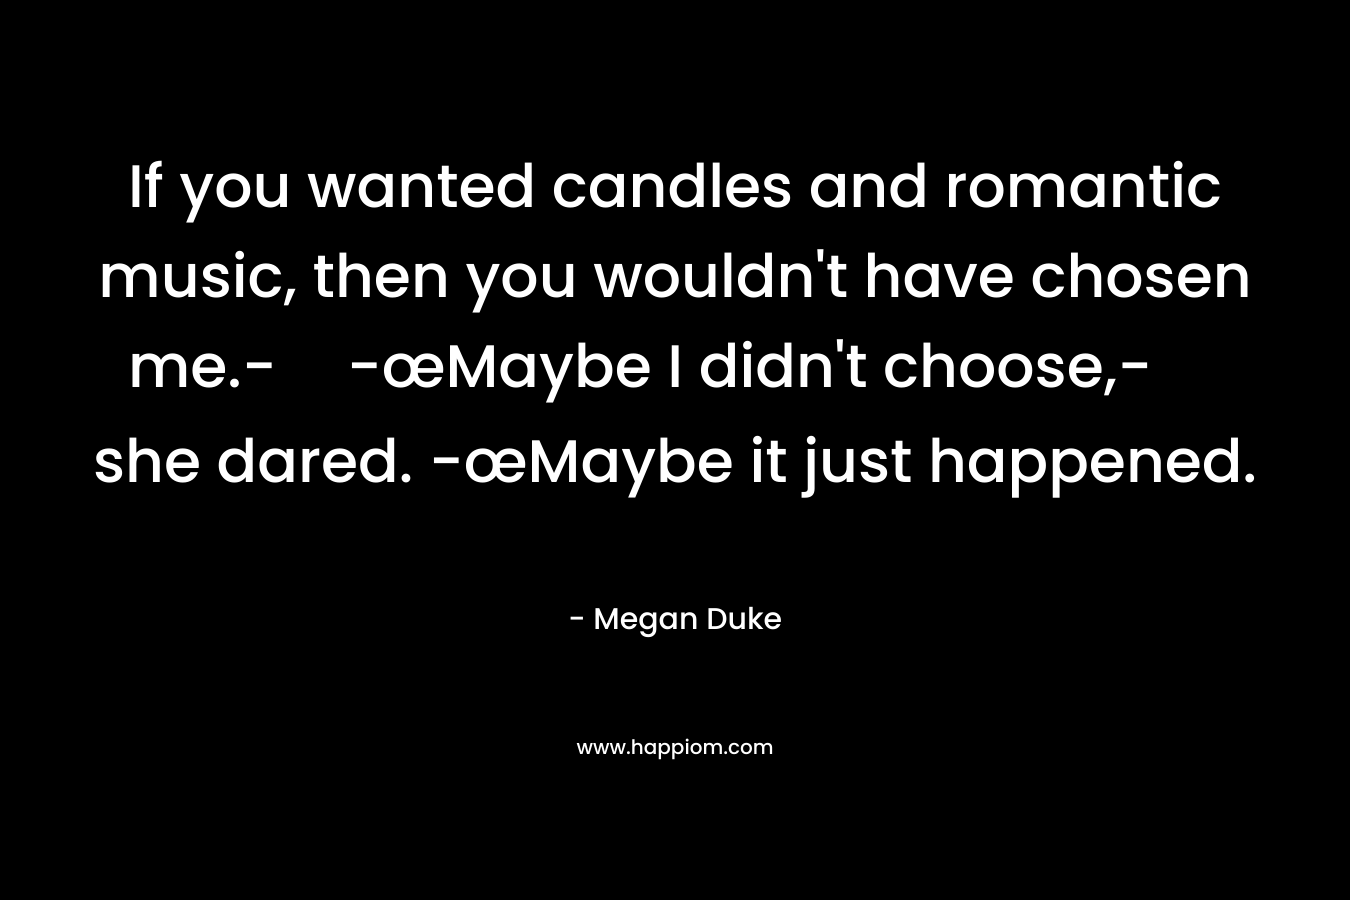 If you wanted candles and romantic music, then you wouldn’t have chosen me.--œMaybe I didn’t choose,- she dared. -œMaybe it just happened. – Megan Duke